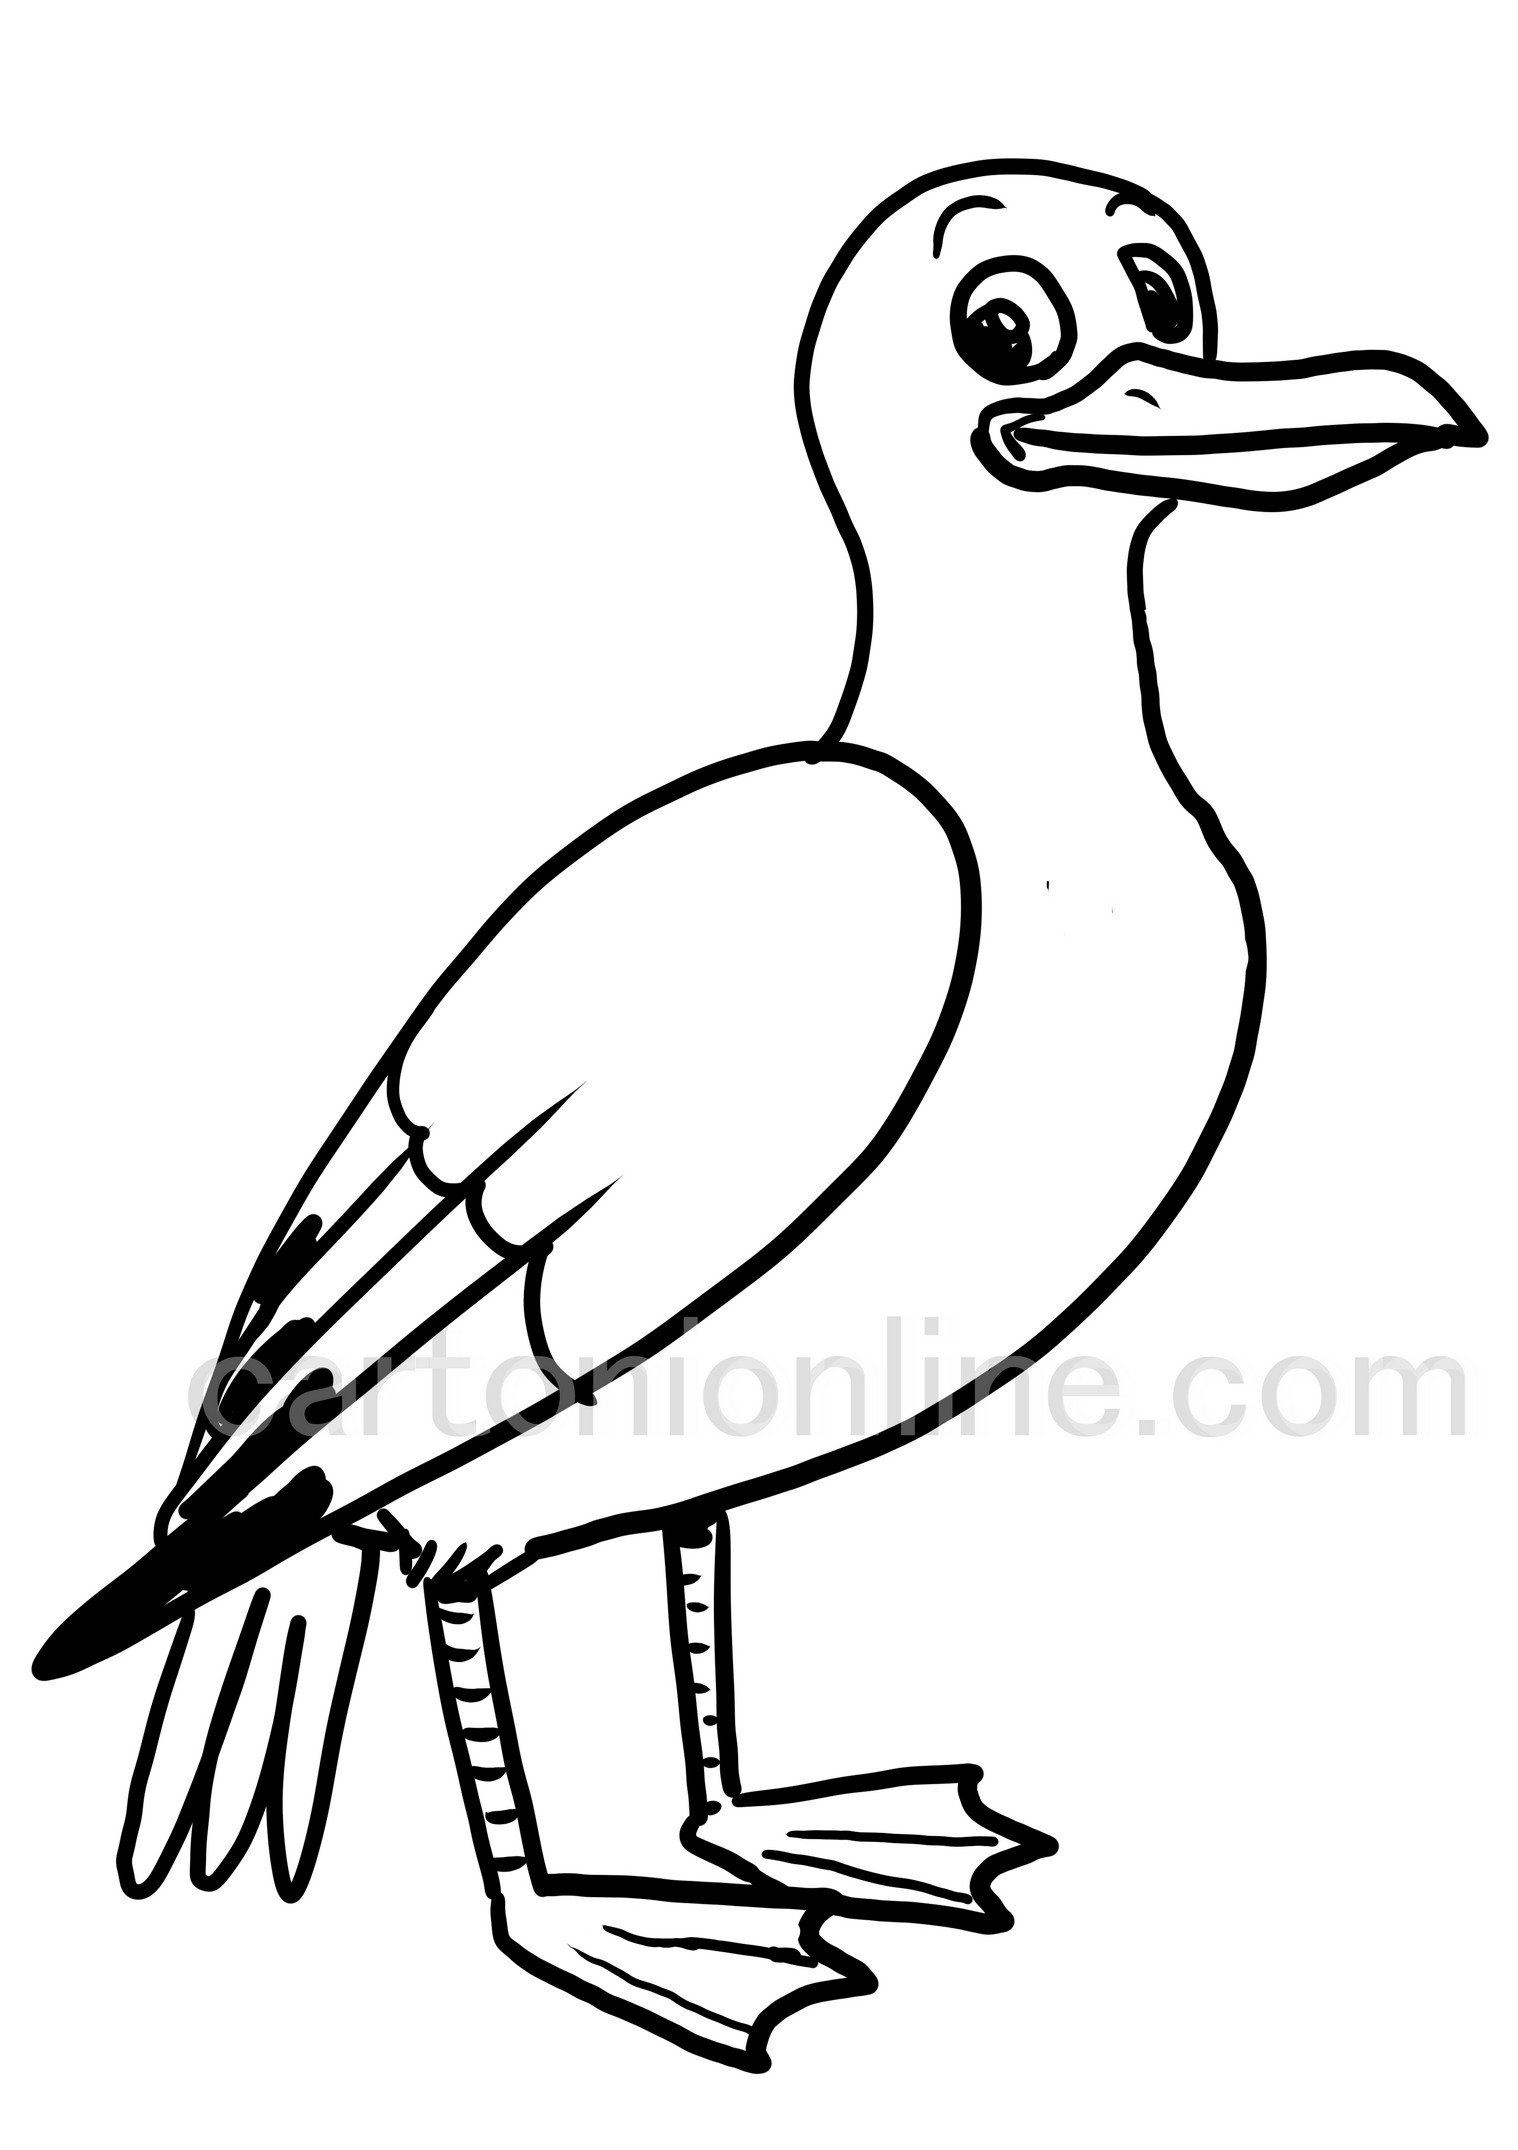 Cartoon style seagull coloring page